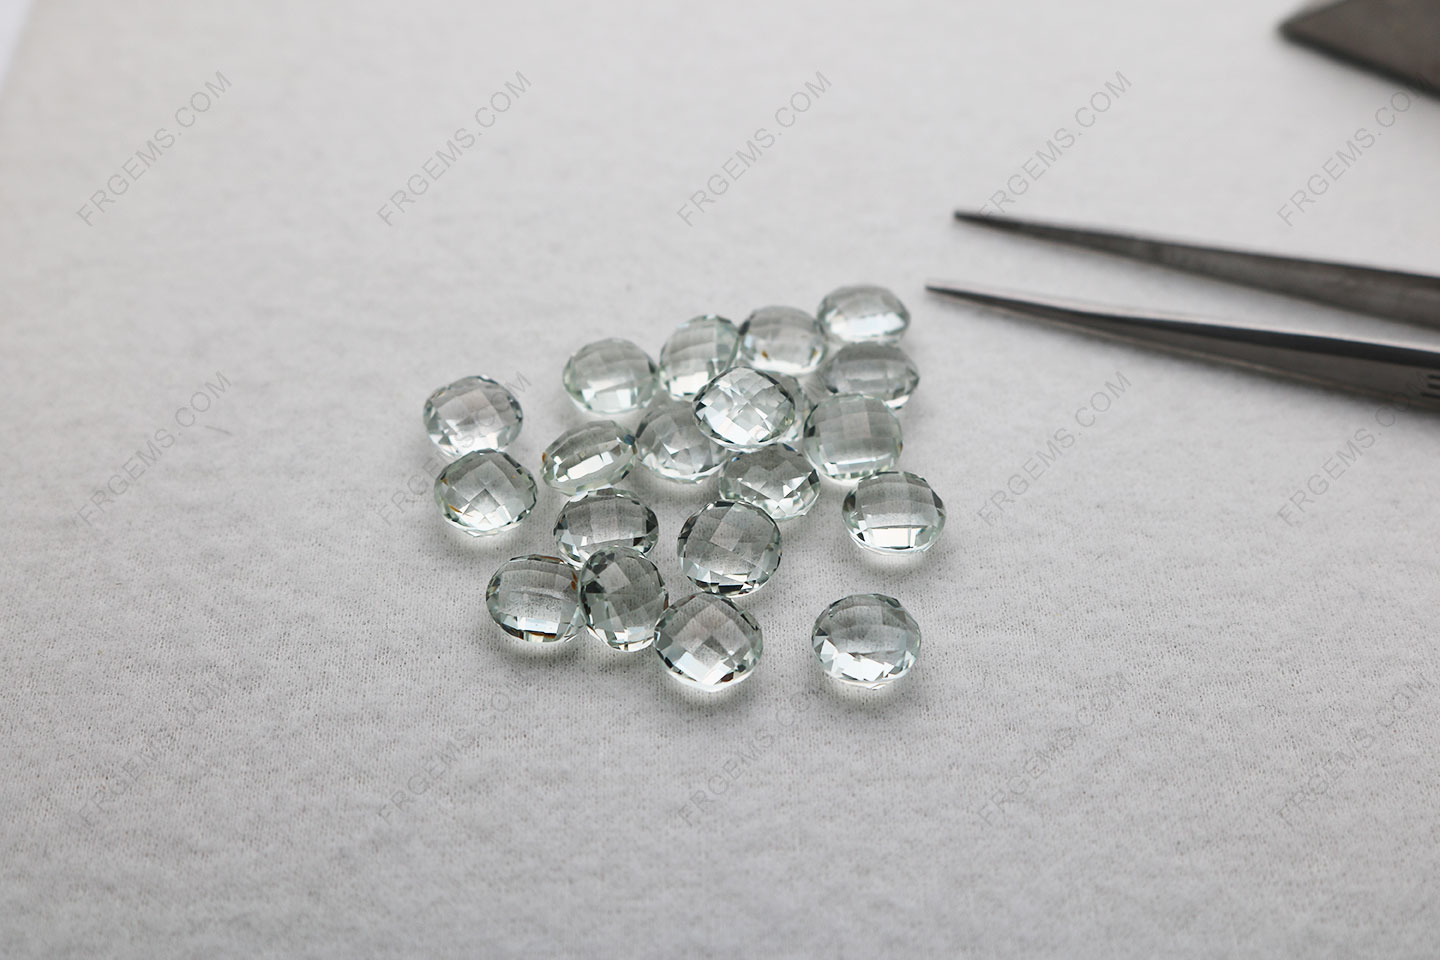 Loose Natural Prasiolite Round shape double checkerboard faceted 8mm gemstones